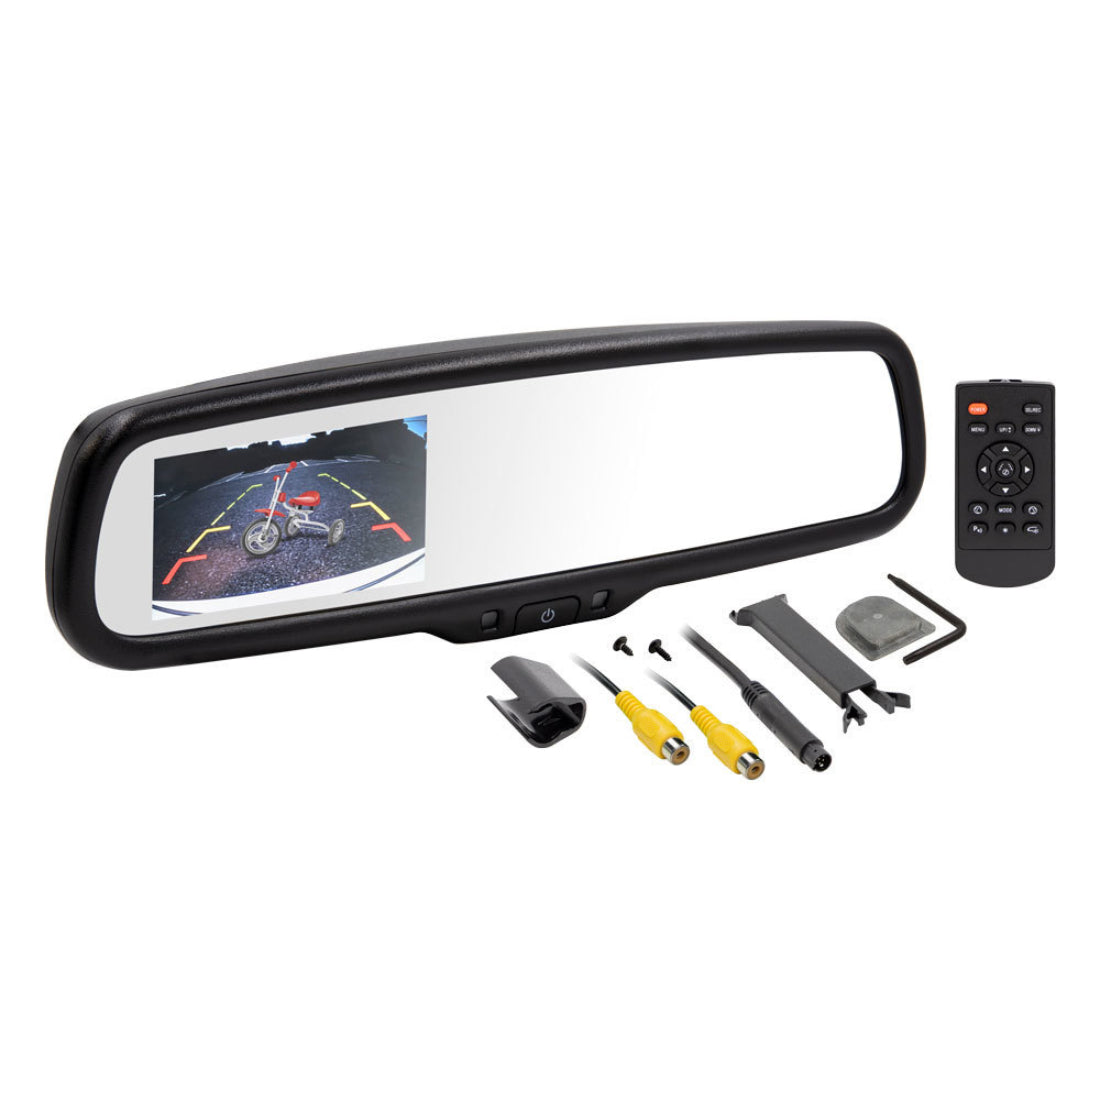 iBeam TE-AD43 OE Style Auto-Dimming Rear View Mirror w/ Built-in 4.3" Monitor